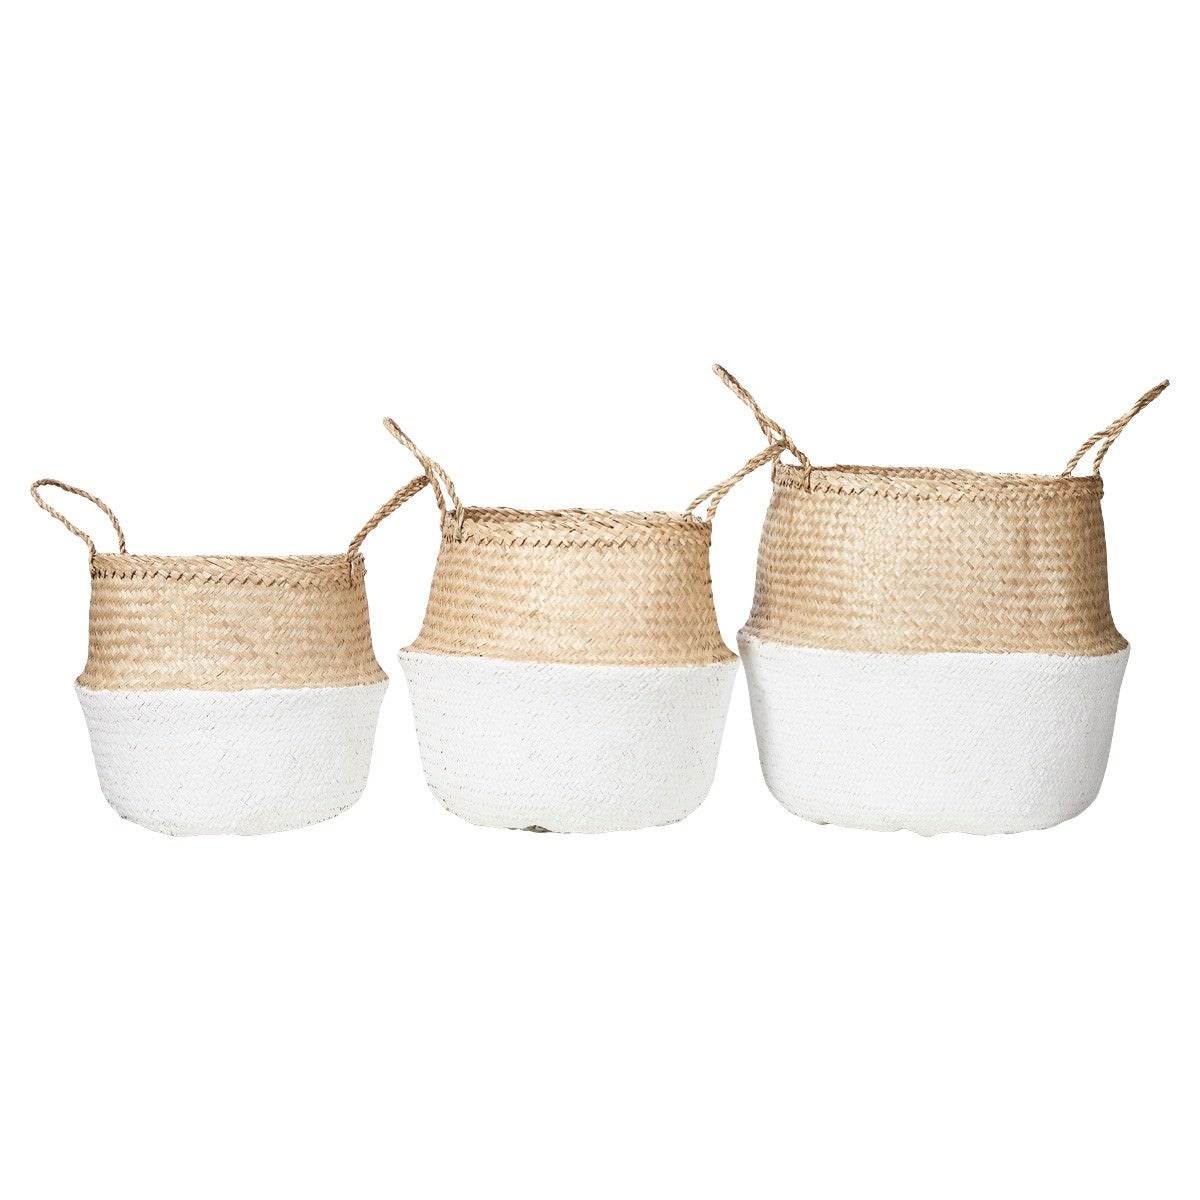 Lucida 3 Piece Foldable Seagrass Basket Set, Natural / White